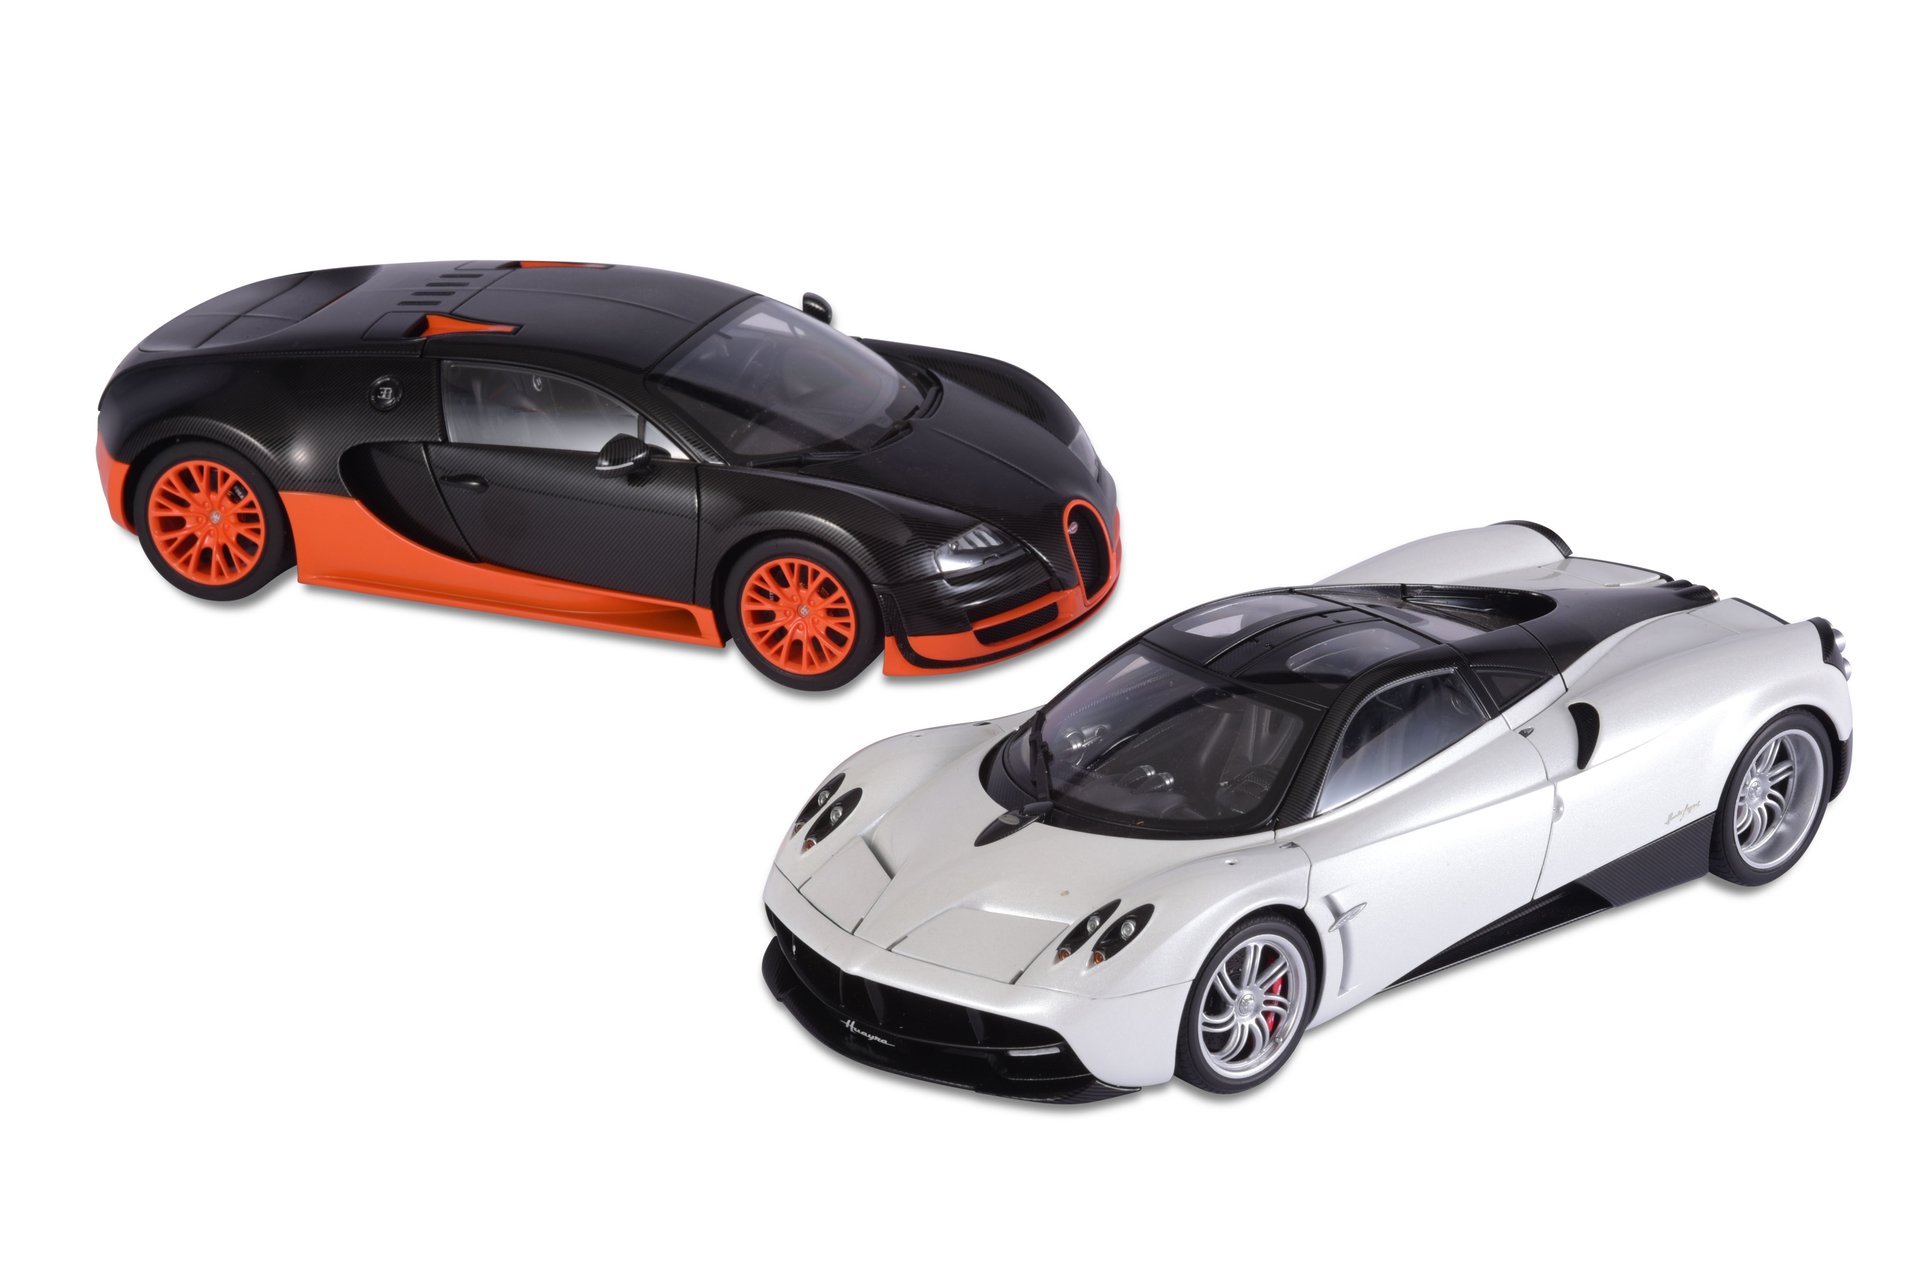 Broad Arrow Auctions | Pair of Super Cars including Bugatti Veyron Super Sport and Pagani Huayra